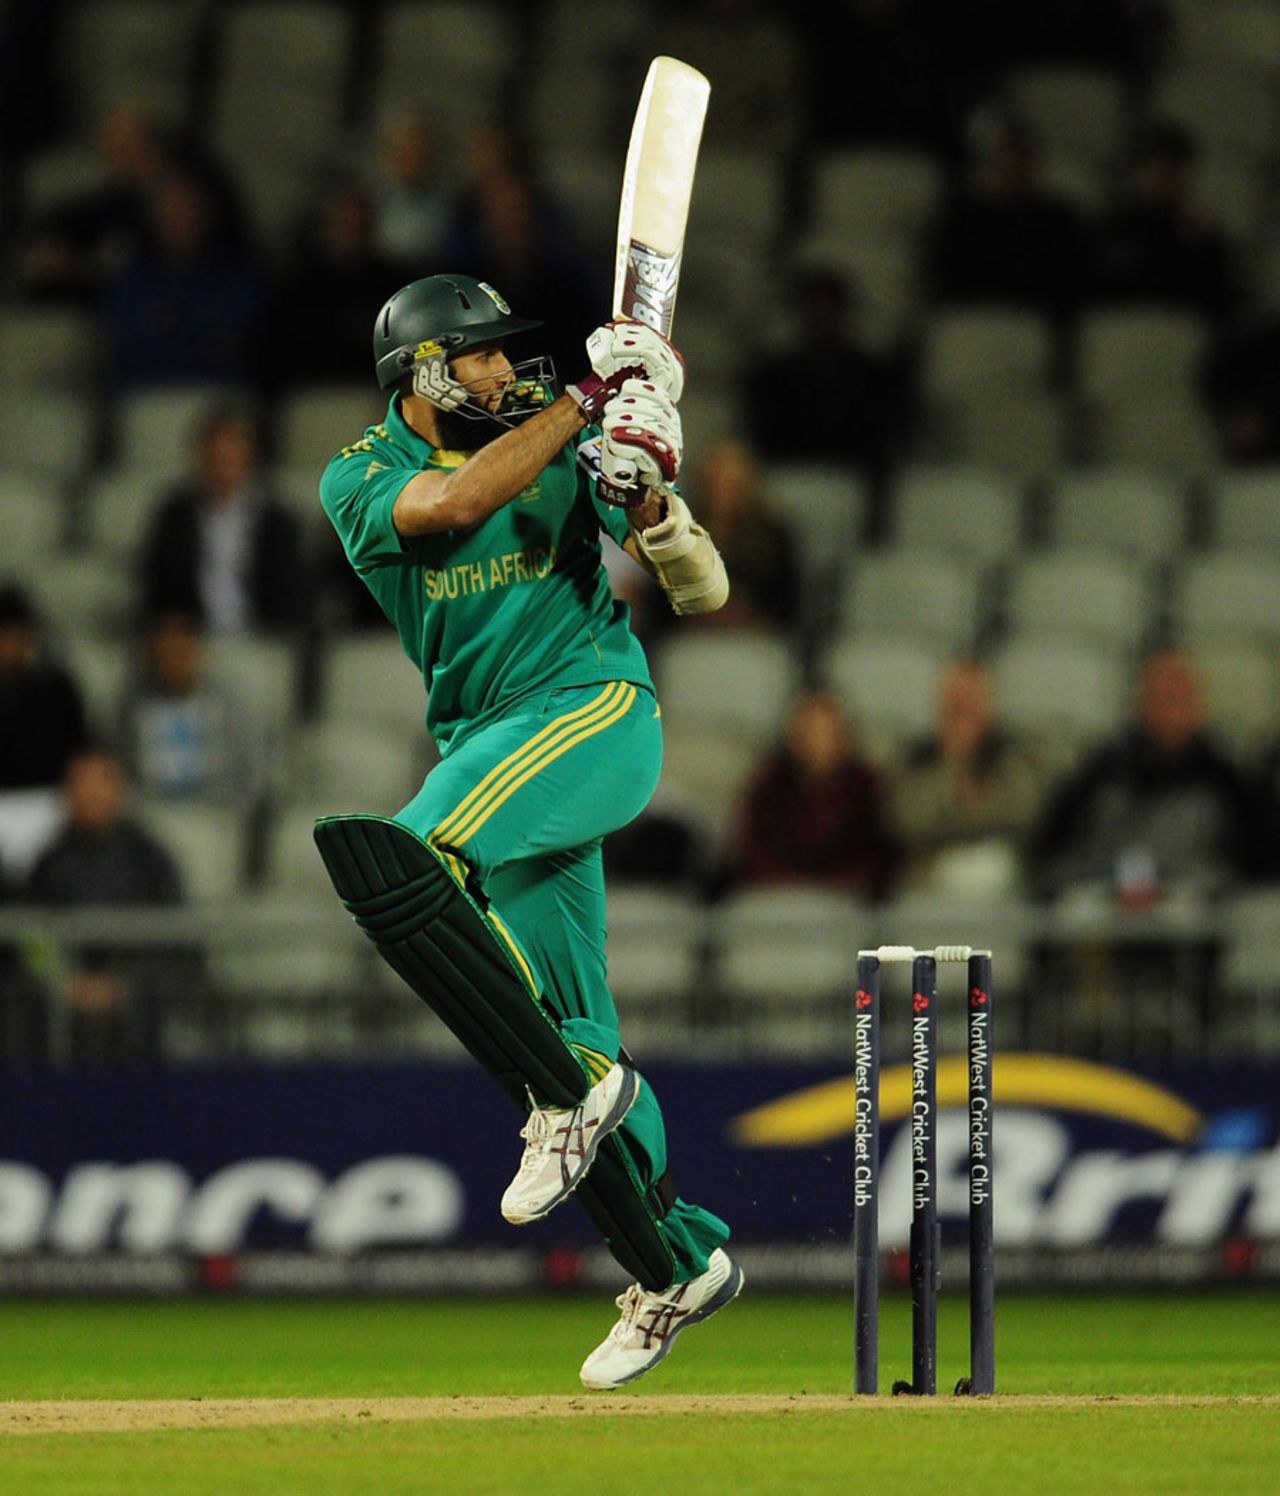 Hashim Amla continued his excellent form, England v South Africa, 2nd T20, Old Trafford, September, 10, 2012